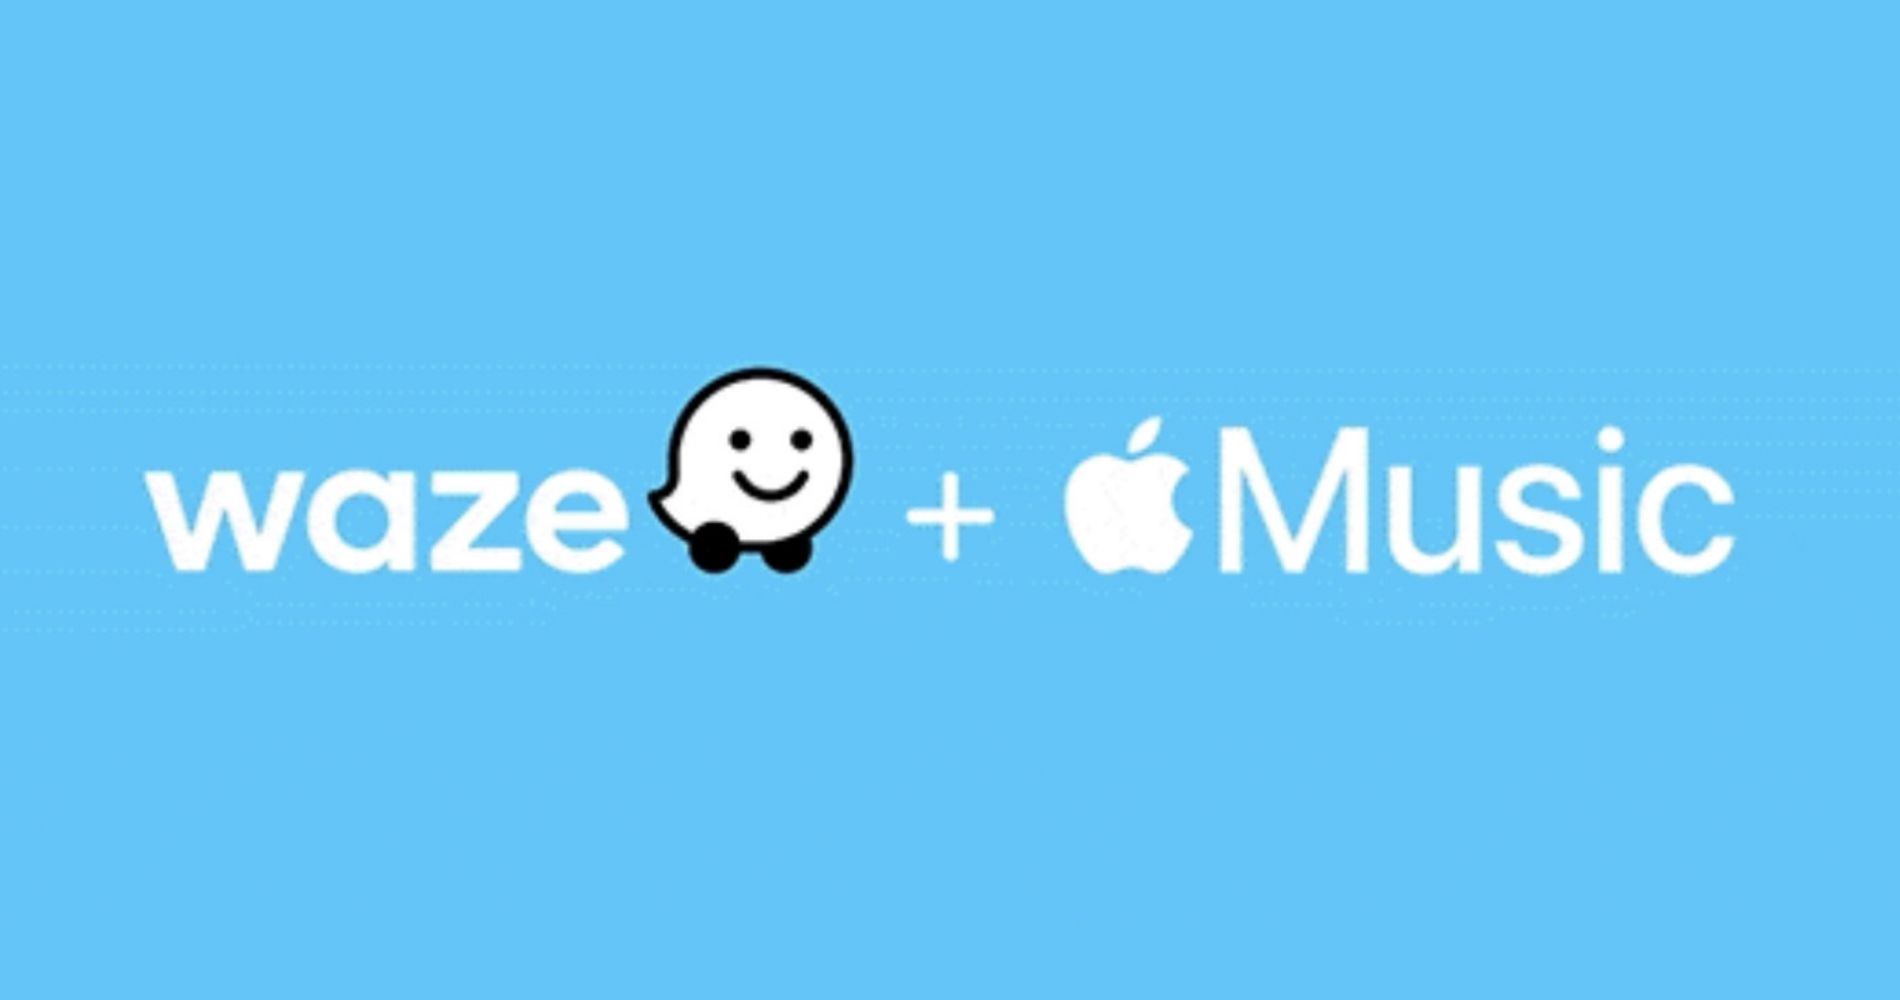 Waze has finally introduced support for Apple Music on iPhones